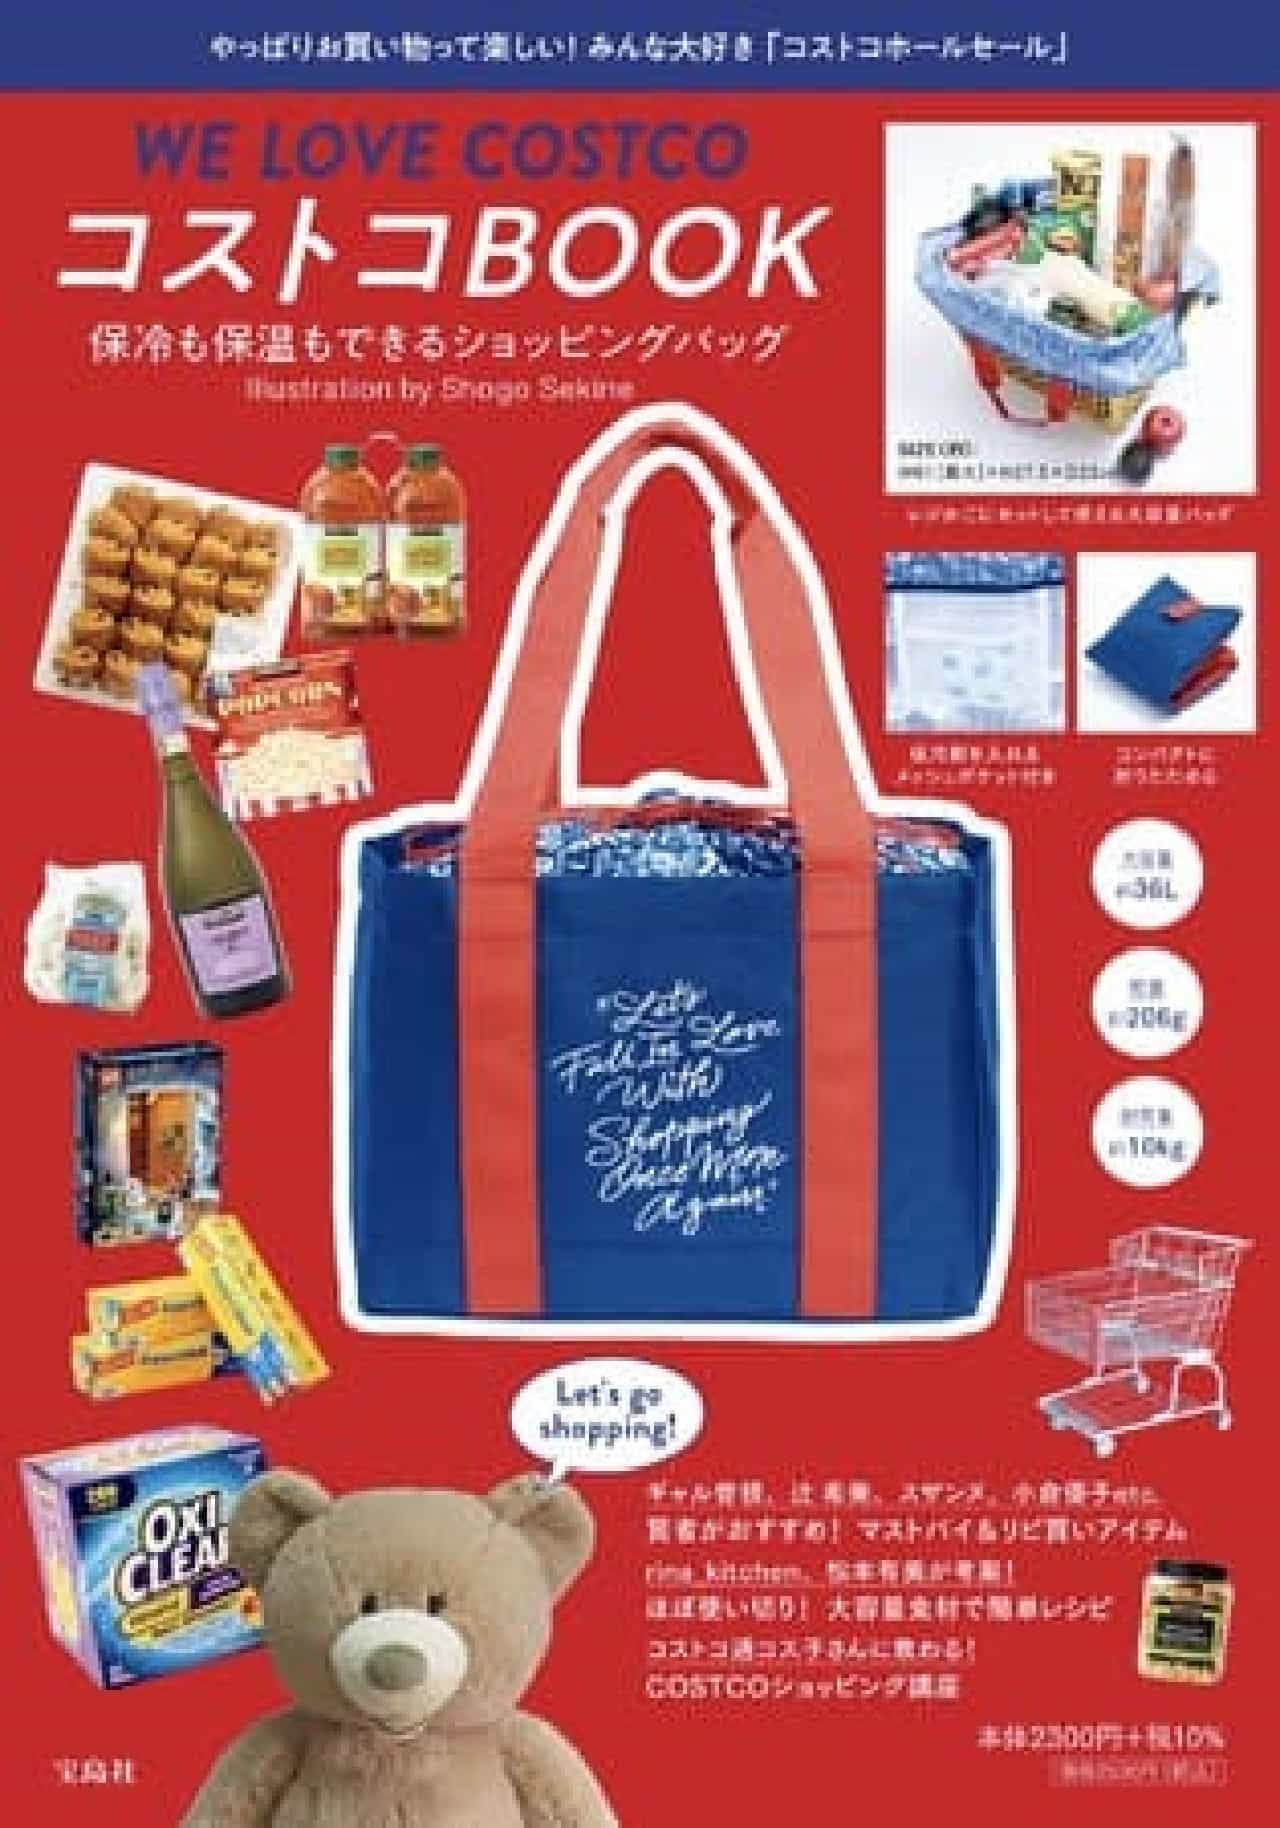 Costco BOOK - Shopping Bags that Keep Cool and Warm - Special Costco Wholesale Edition! Appendix design by Shogo Sekine